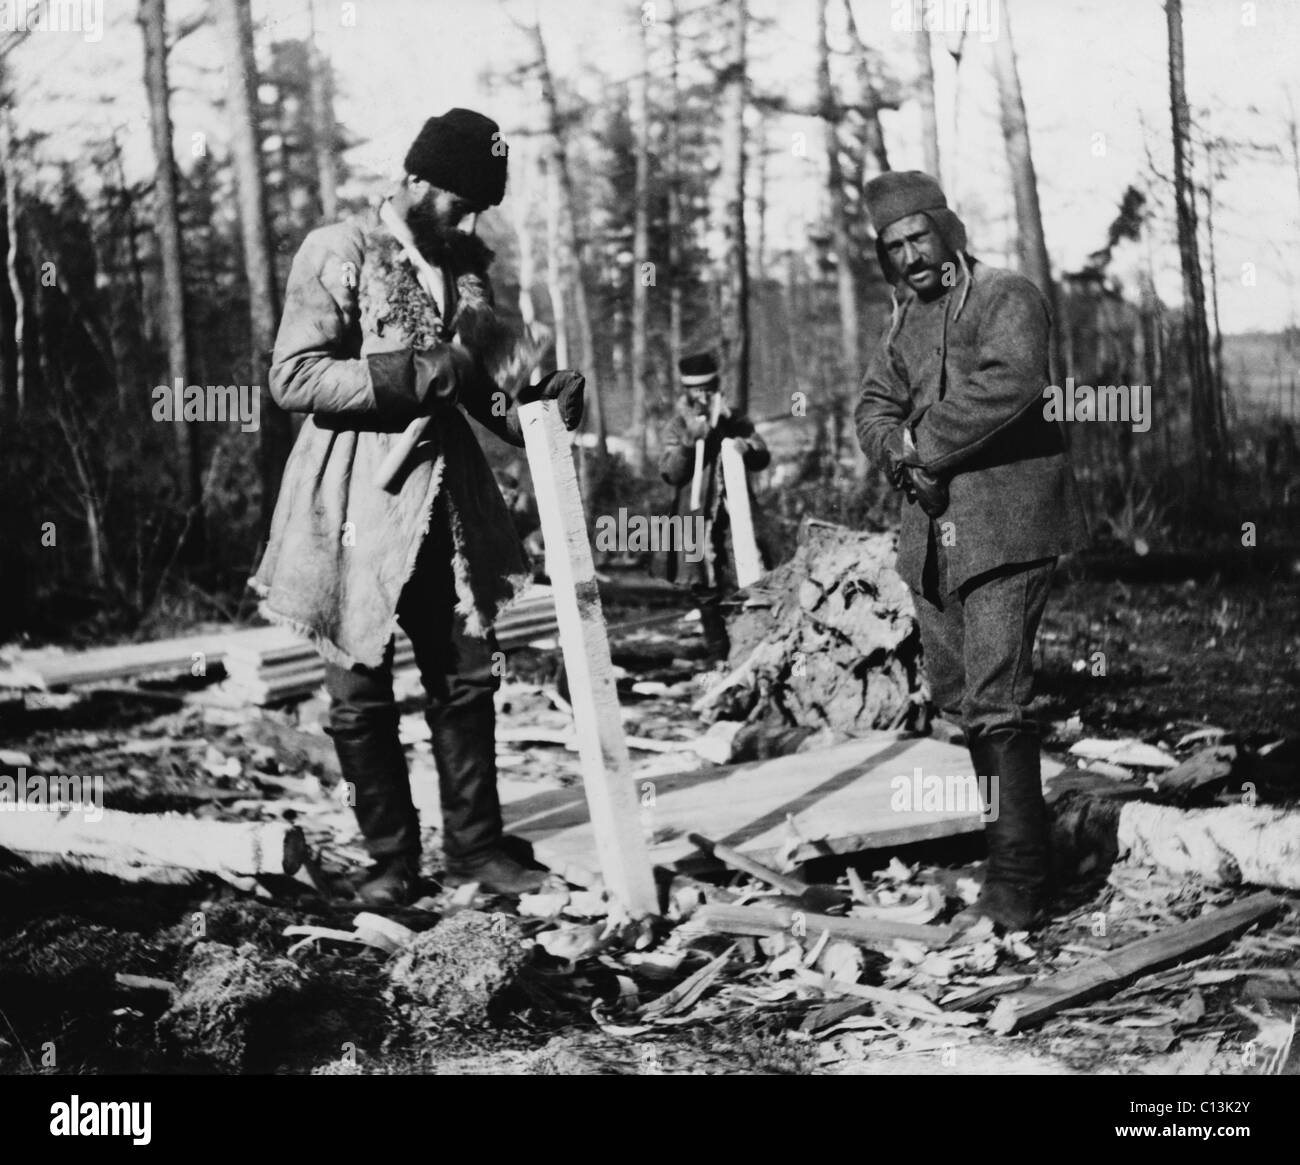 Three Russian convicts building a camp near the Eastern Siberian Railroad. Throughout the 19th century, Russia populated its easternmost territories with political and criminal prisoners. Ca. 1895 photo by William Henry Jackson. Stock Photo